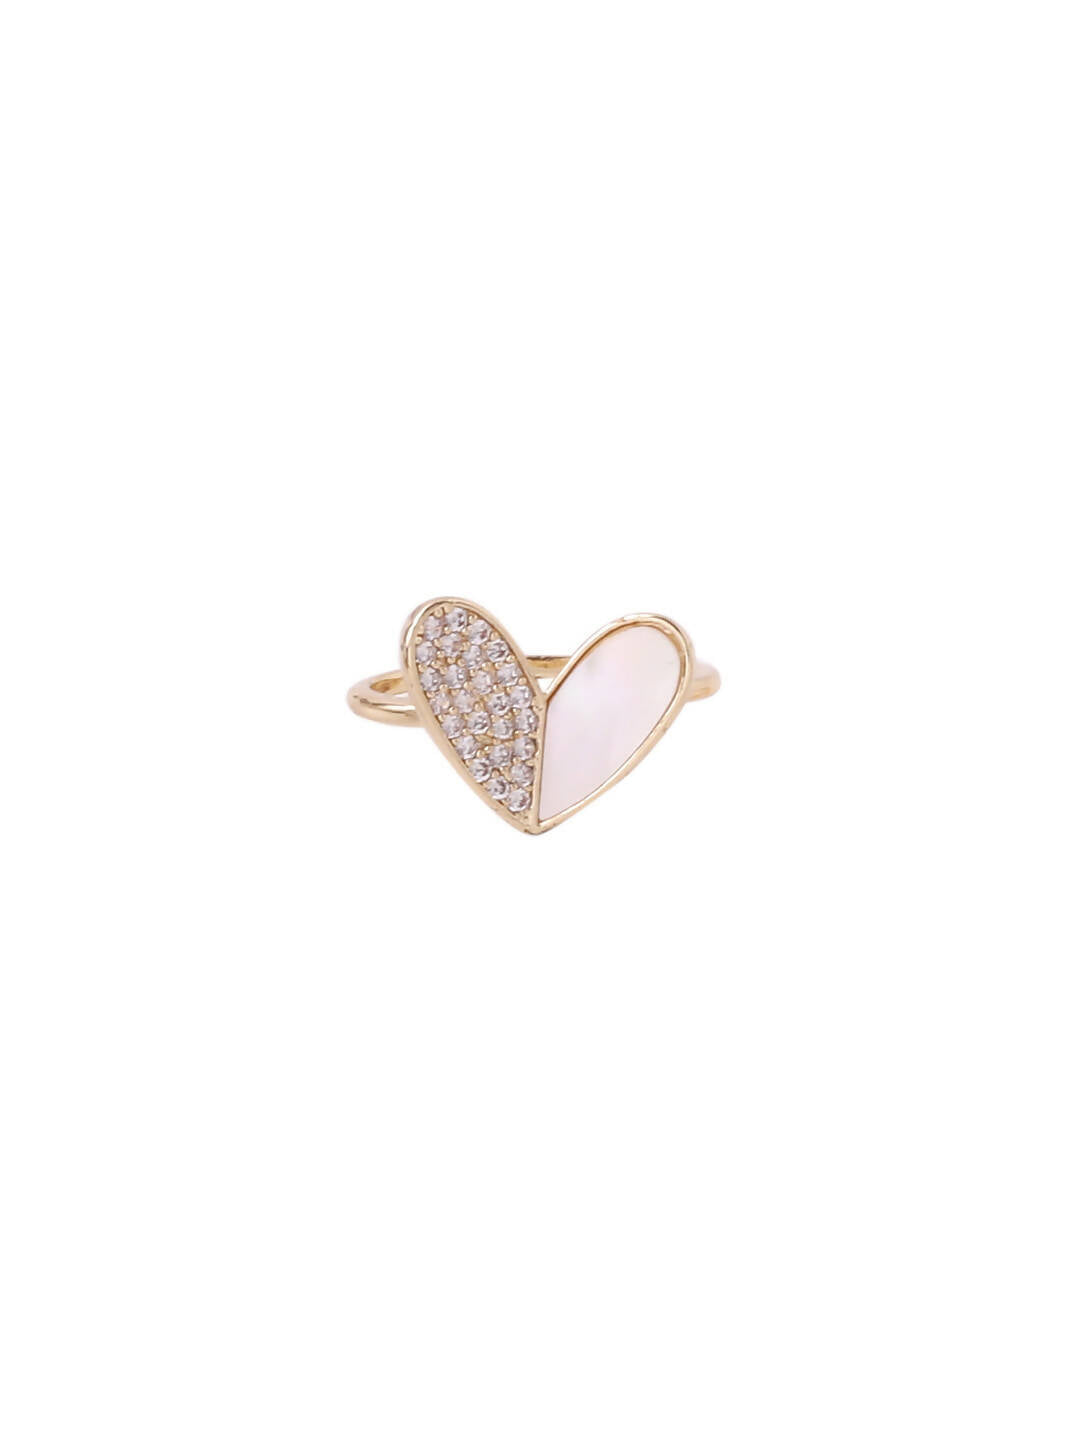 NVR Women's Gold-Plated Stylish Ring With Ad Stones - Distacart